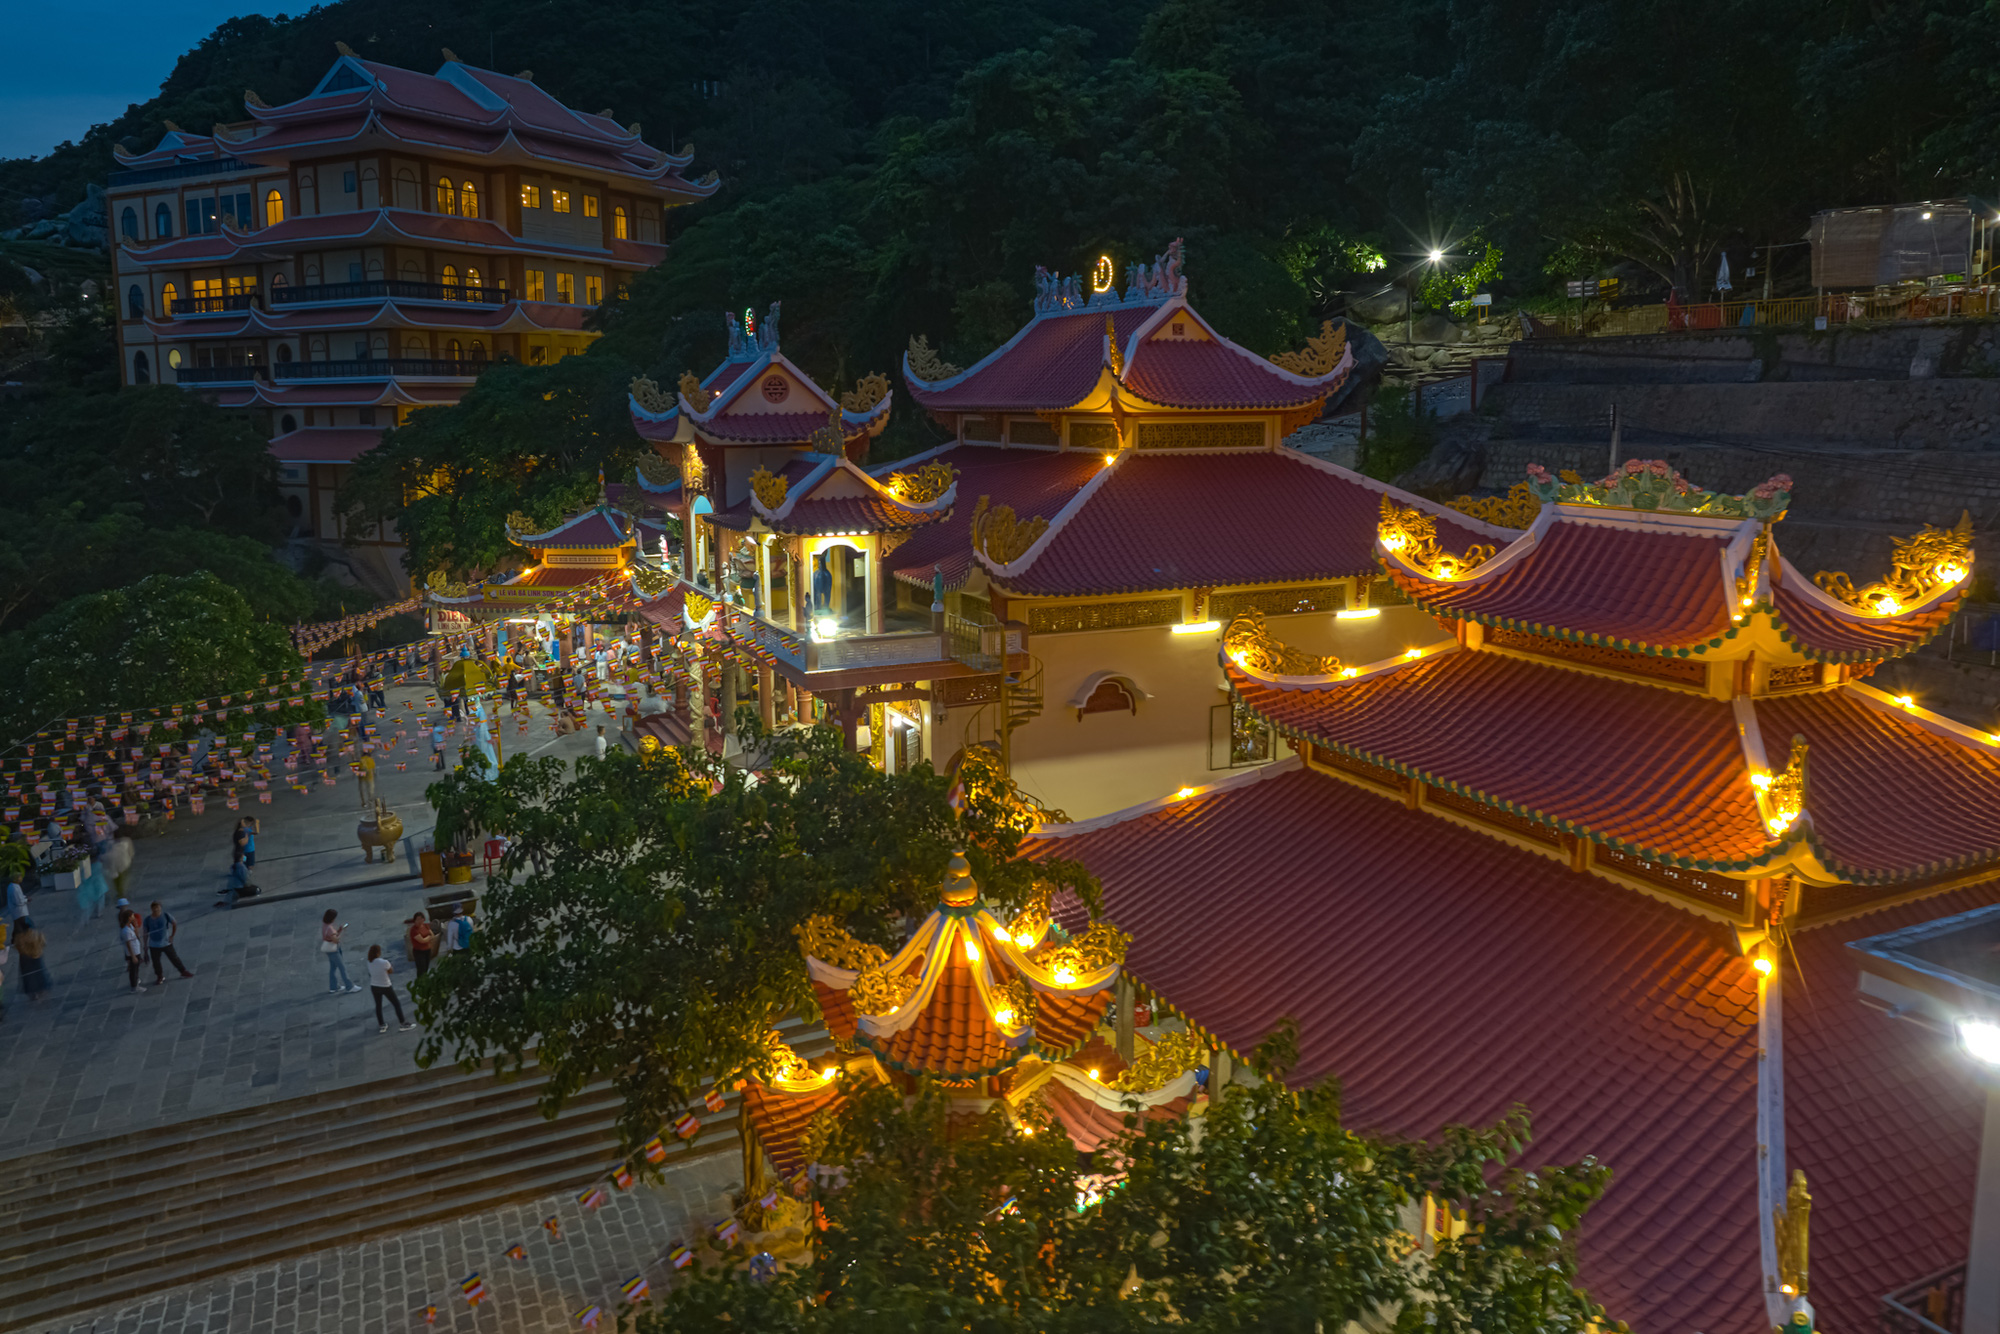 The Linh Son Thanh Mau (Mother Goddess of the Mountain) temple at night on Ba Den Mountain in Tay Ninh Province, southern Vietnam. Photo: Supplied